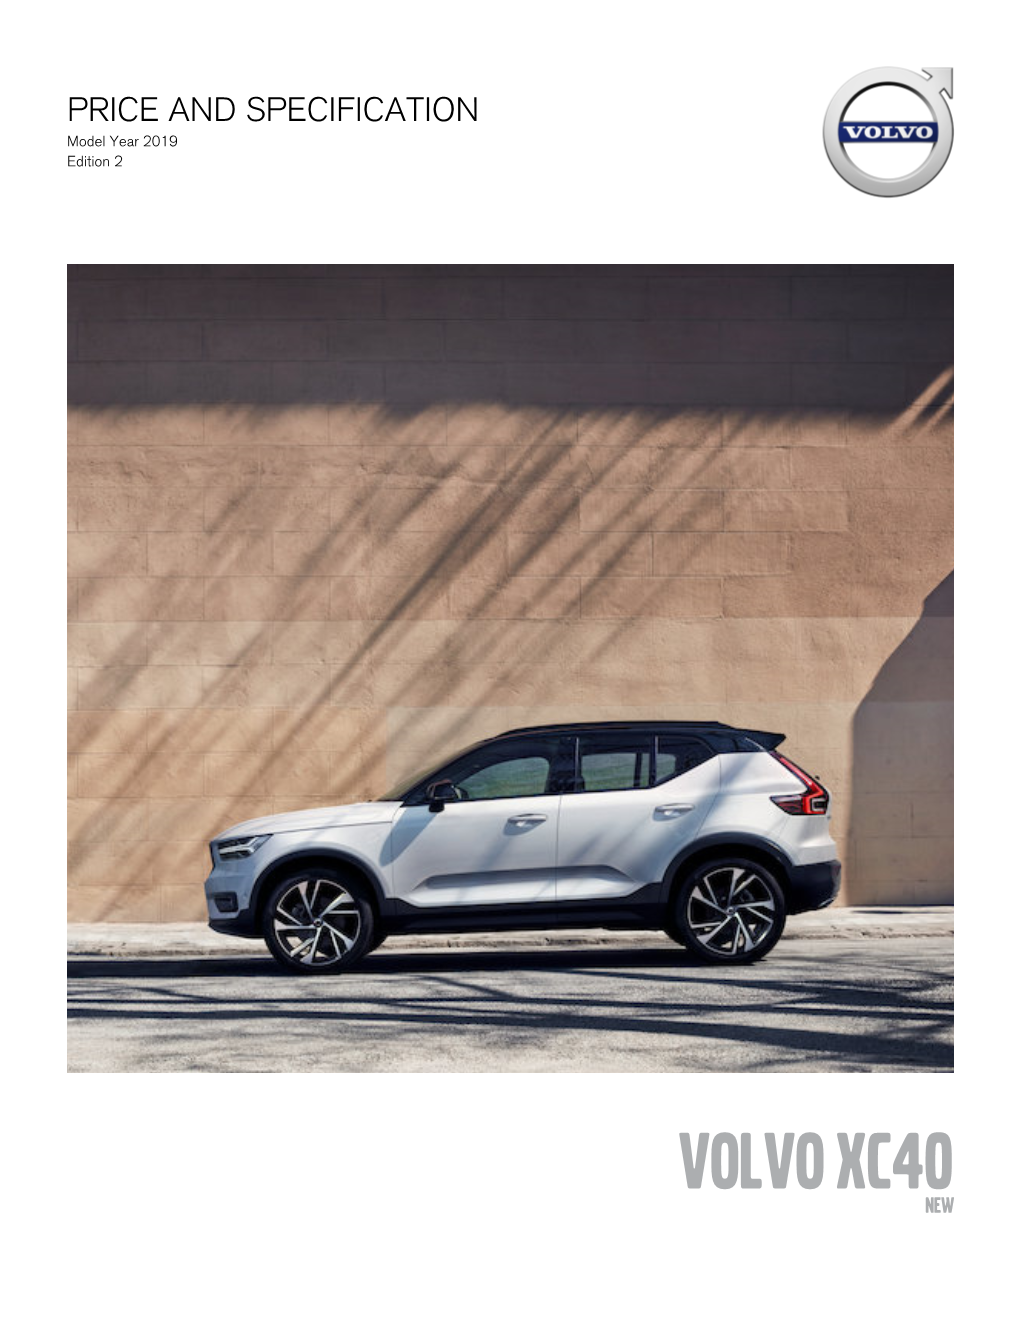 Volvo Xc40 New Your Own Xc40 Is in Reach